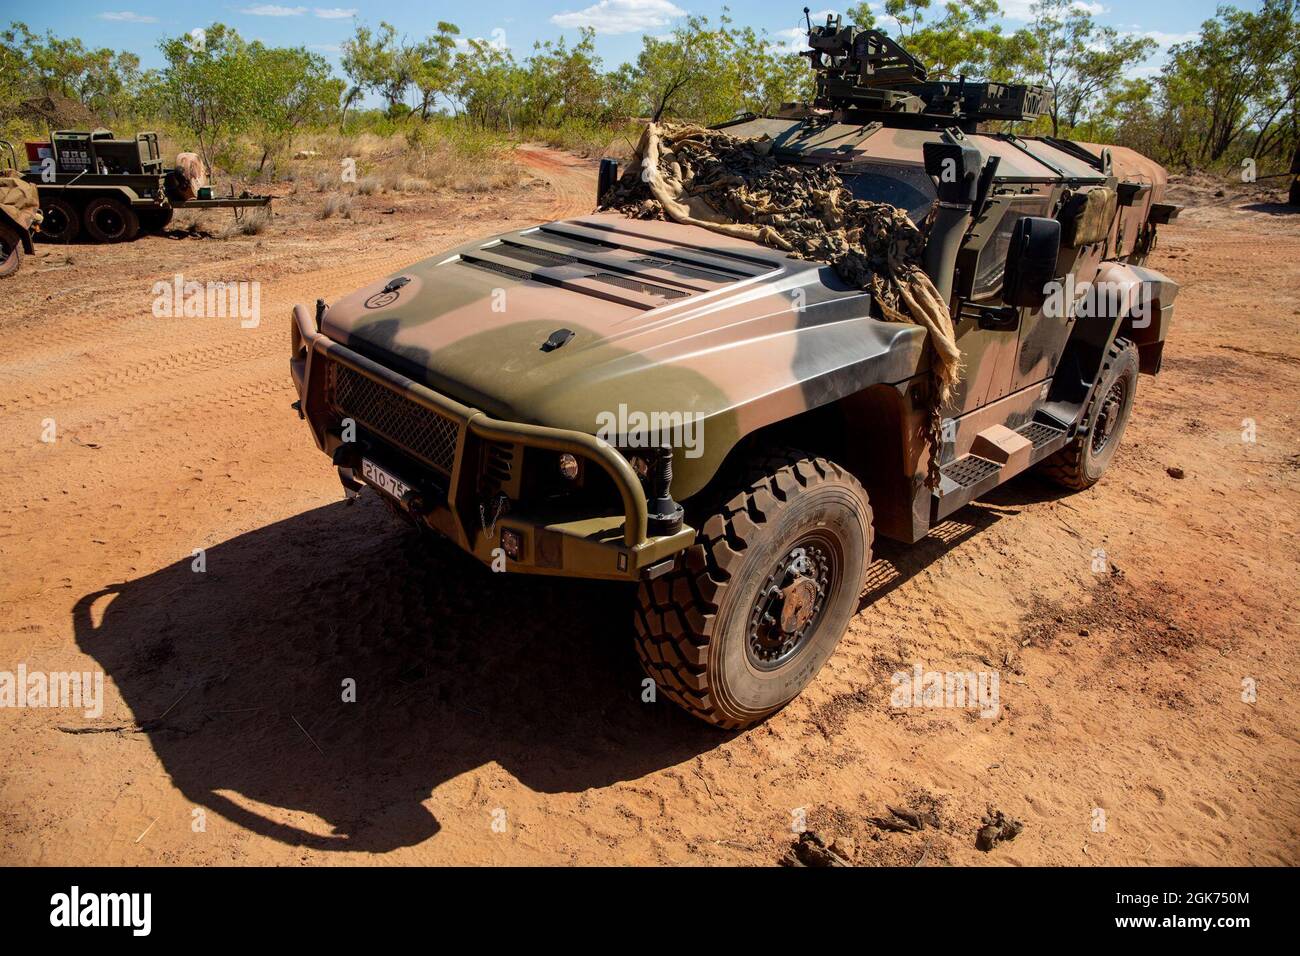 An Australian Army Protected Mobility Vehicle – Light is staged during Exercise Koolendong at Bradshaw Field Training Area, NT, Australia, Aug. 21, 2021. The PMV-L was born into service in 2020. Exercises like Koolendong validate MRF-D’s and the Australian Defence Force’s ability to conduct expeditionary advanced base operations with combined innovative capabilities and through their shared commitment, ready to respond to a crisis or contingency in the Indo-Pacific region. Stock Photo